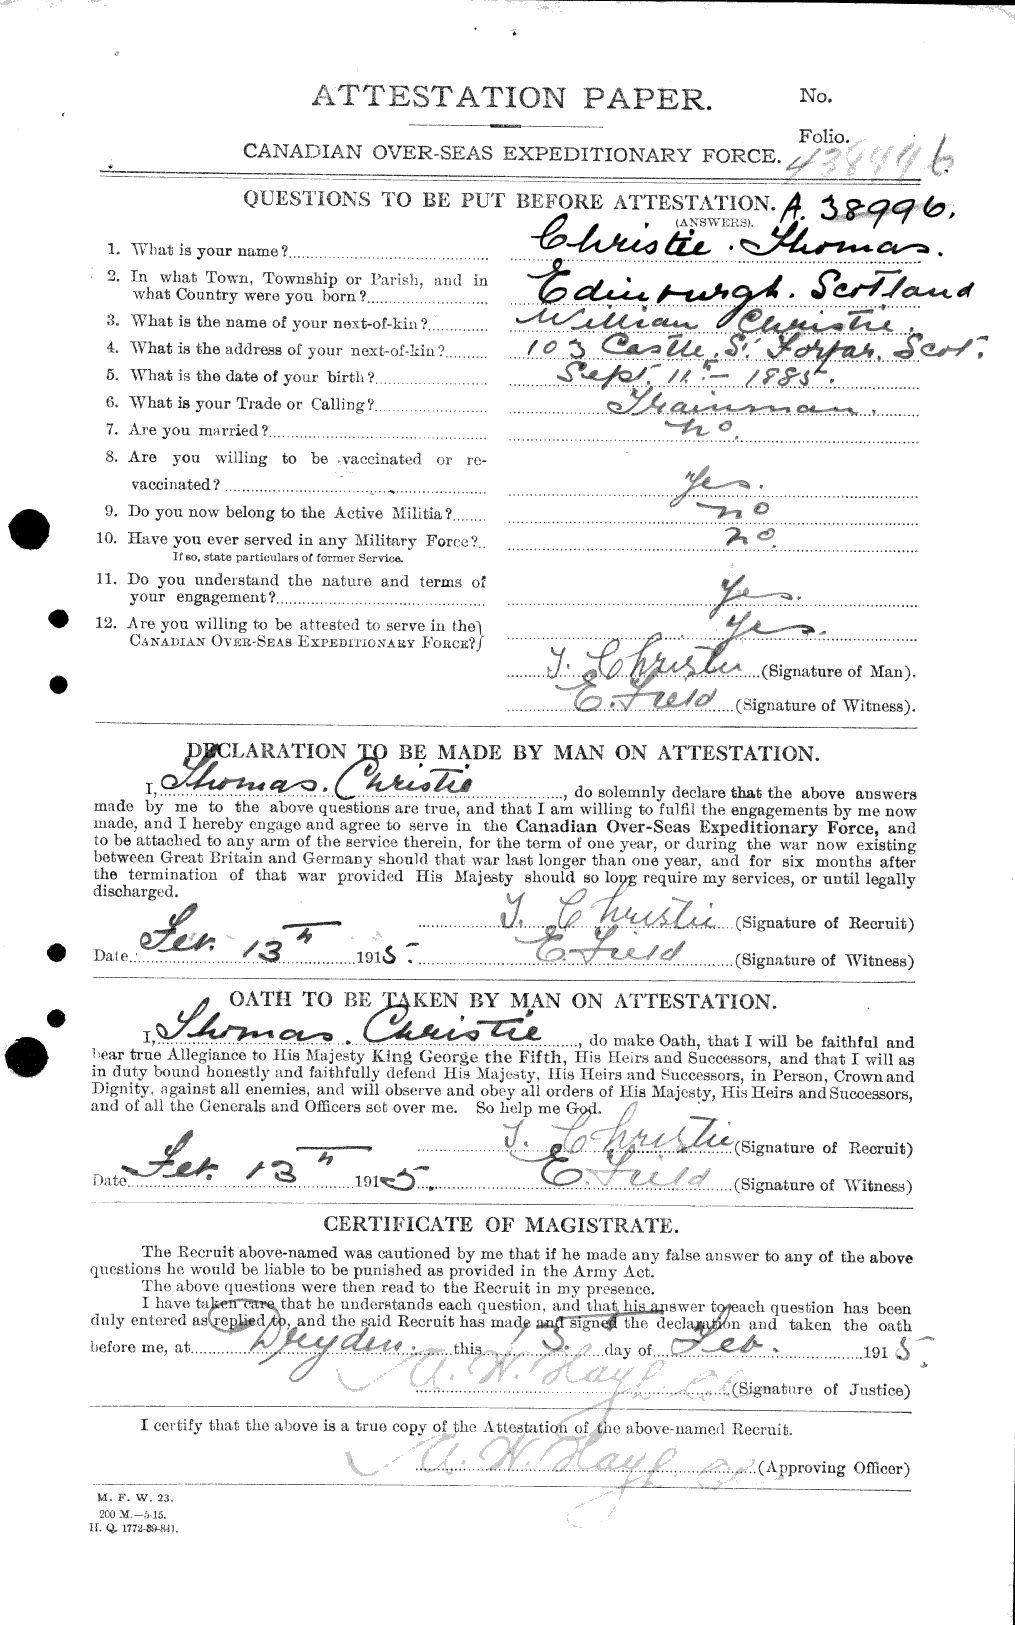 Personnel Records of the First World War - CEF 022068a